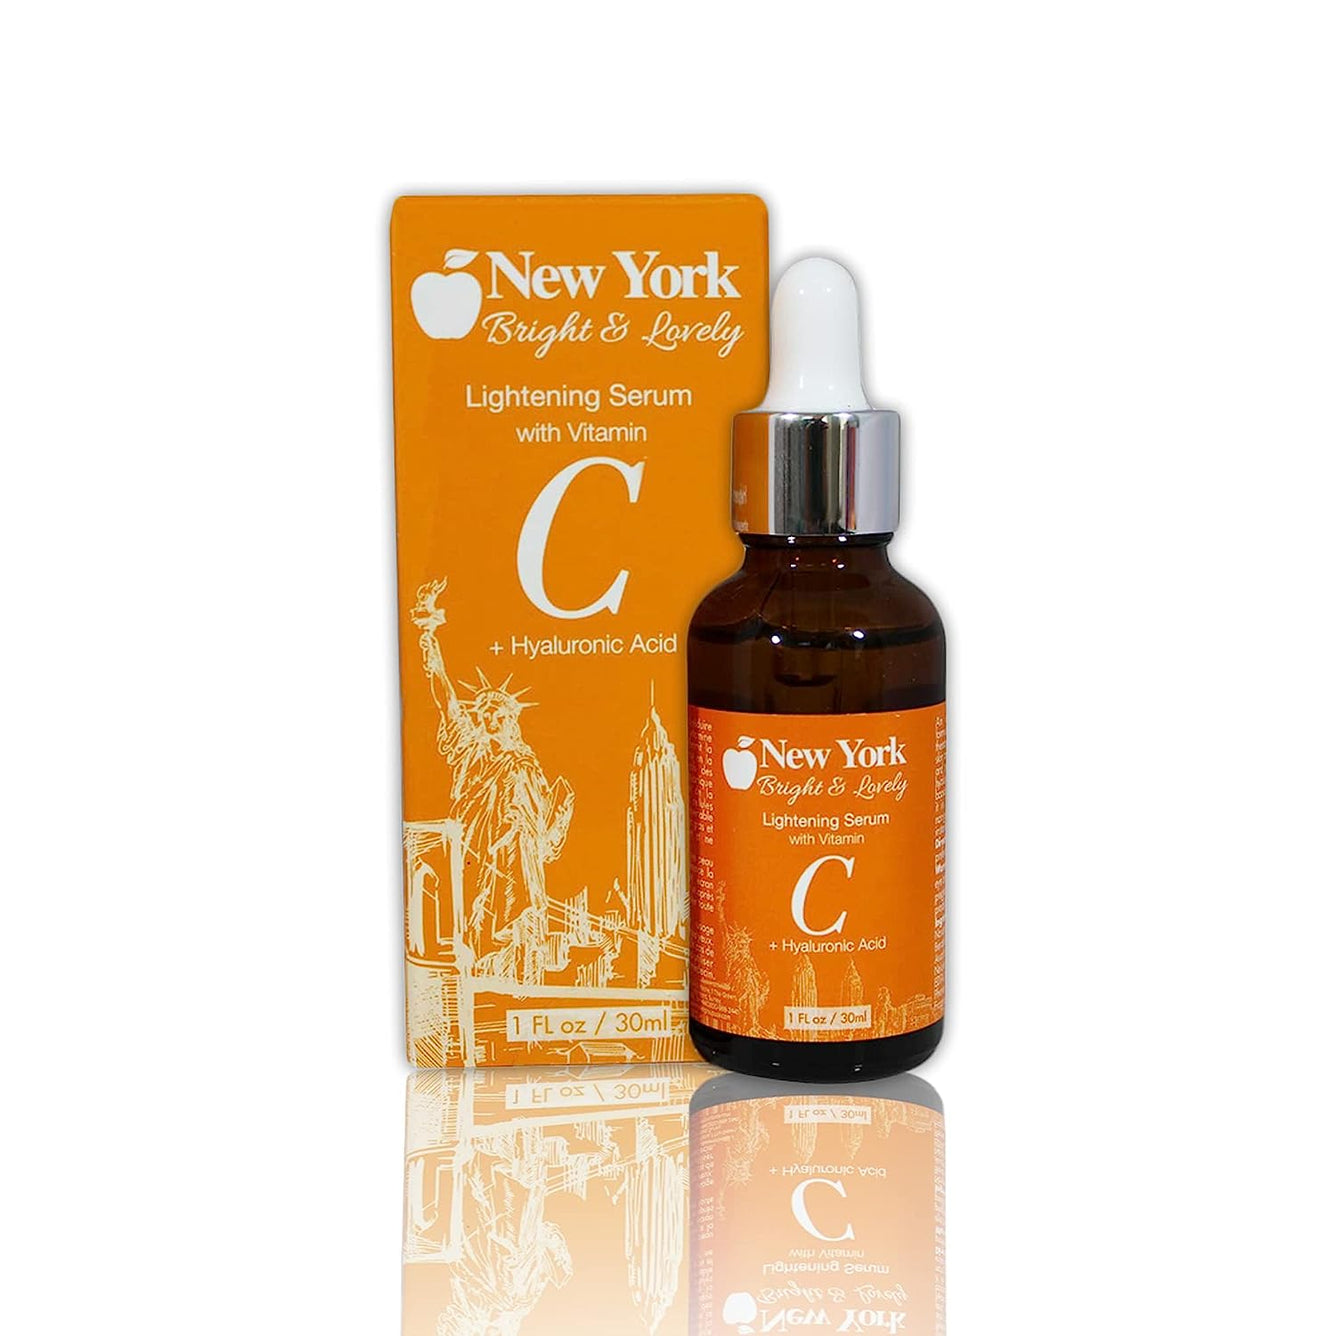 New York Bright & Lovely, Hyaluronic Acid Serum for Face | 1 Fl oz / 30 ml Mitchell Brands - Mitchell Brands - Skin Lightening, Skin Brightening, Fade Dark Spots, Shea Butter, Hair Growth Products